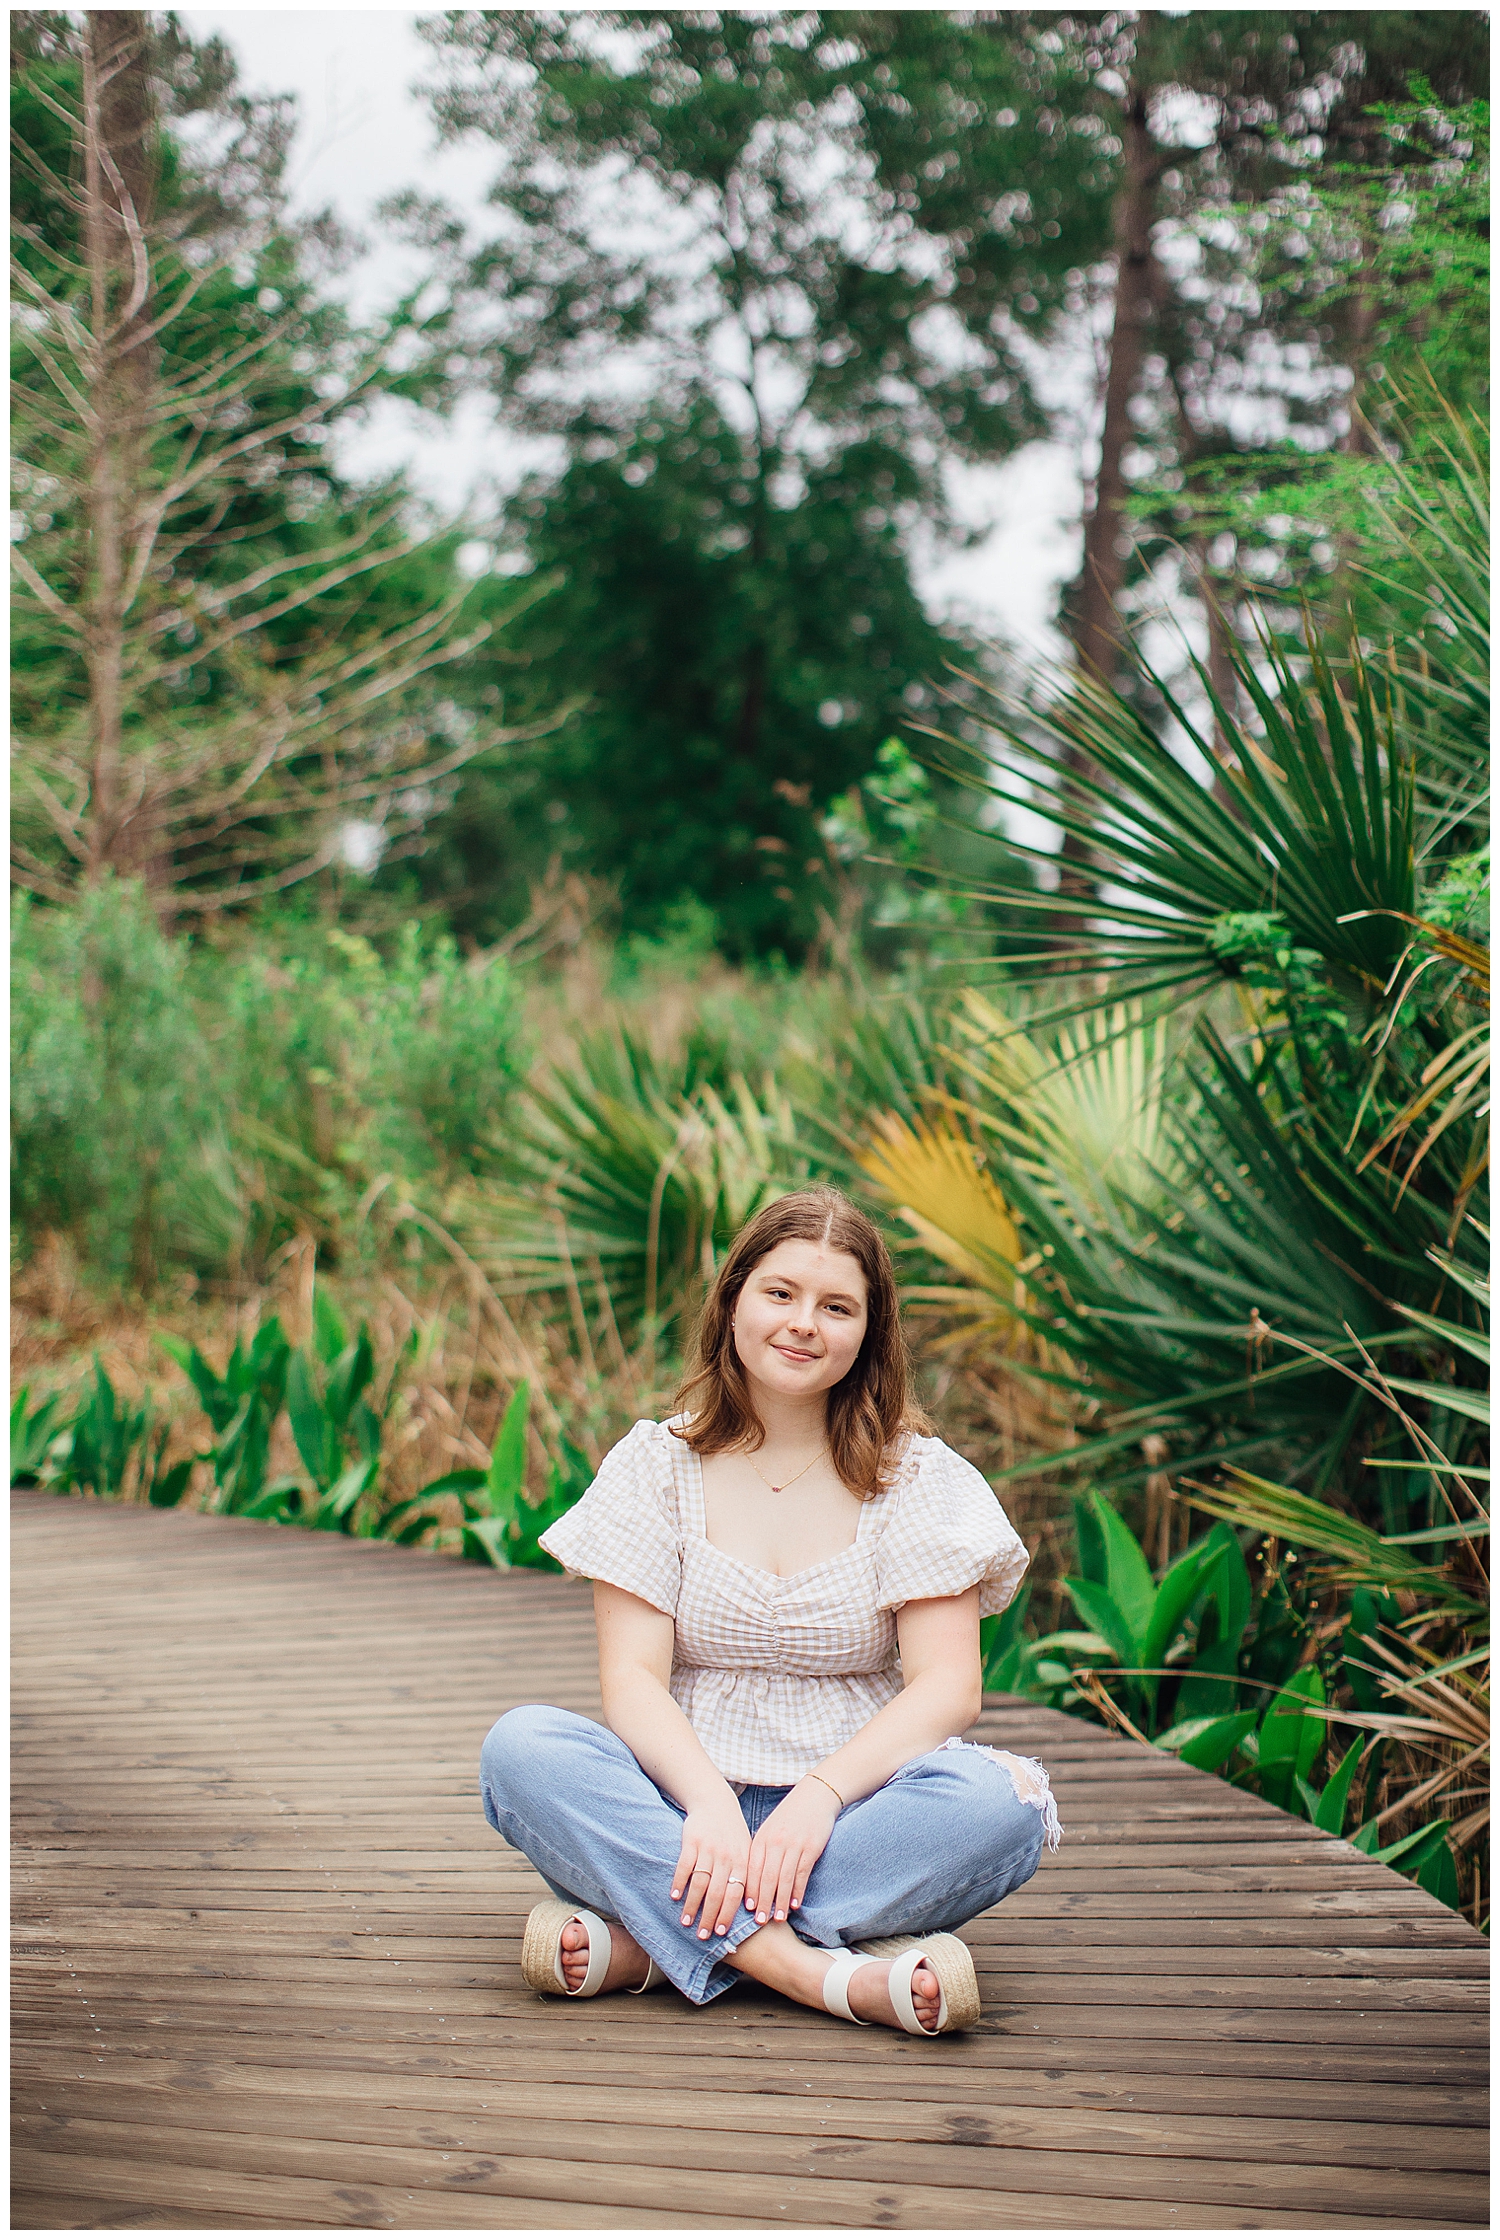 outdoor spring senior photos at Houston Arboretum with girl sitting in jeans and cream shirt on boardwalk